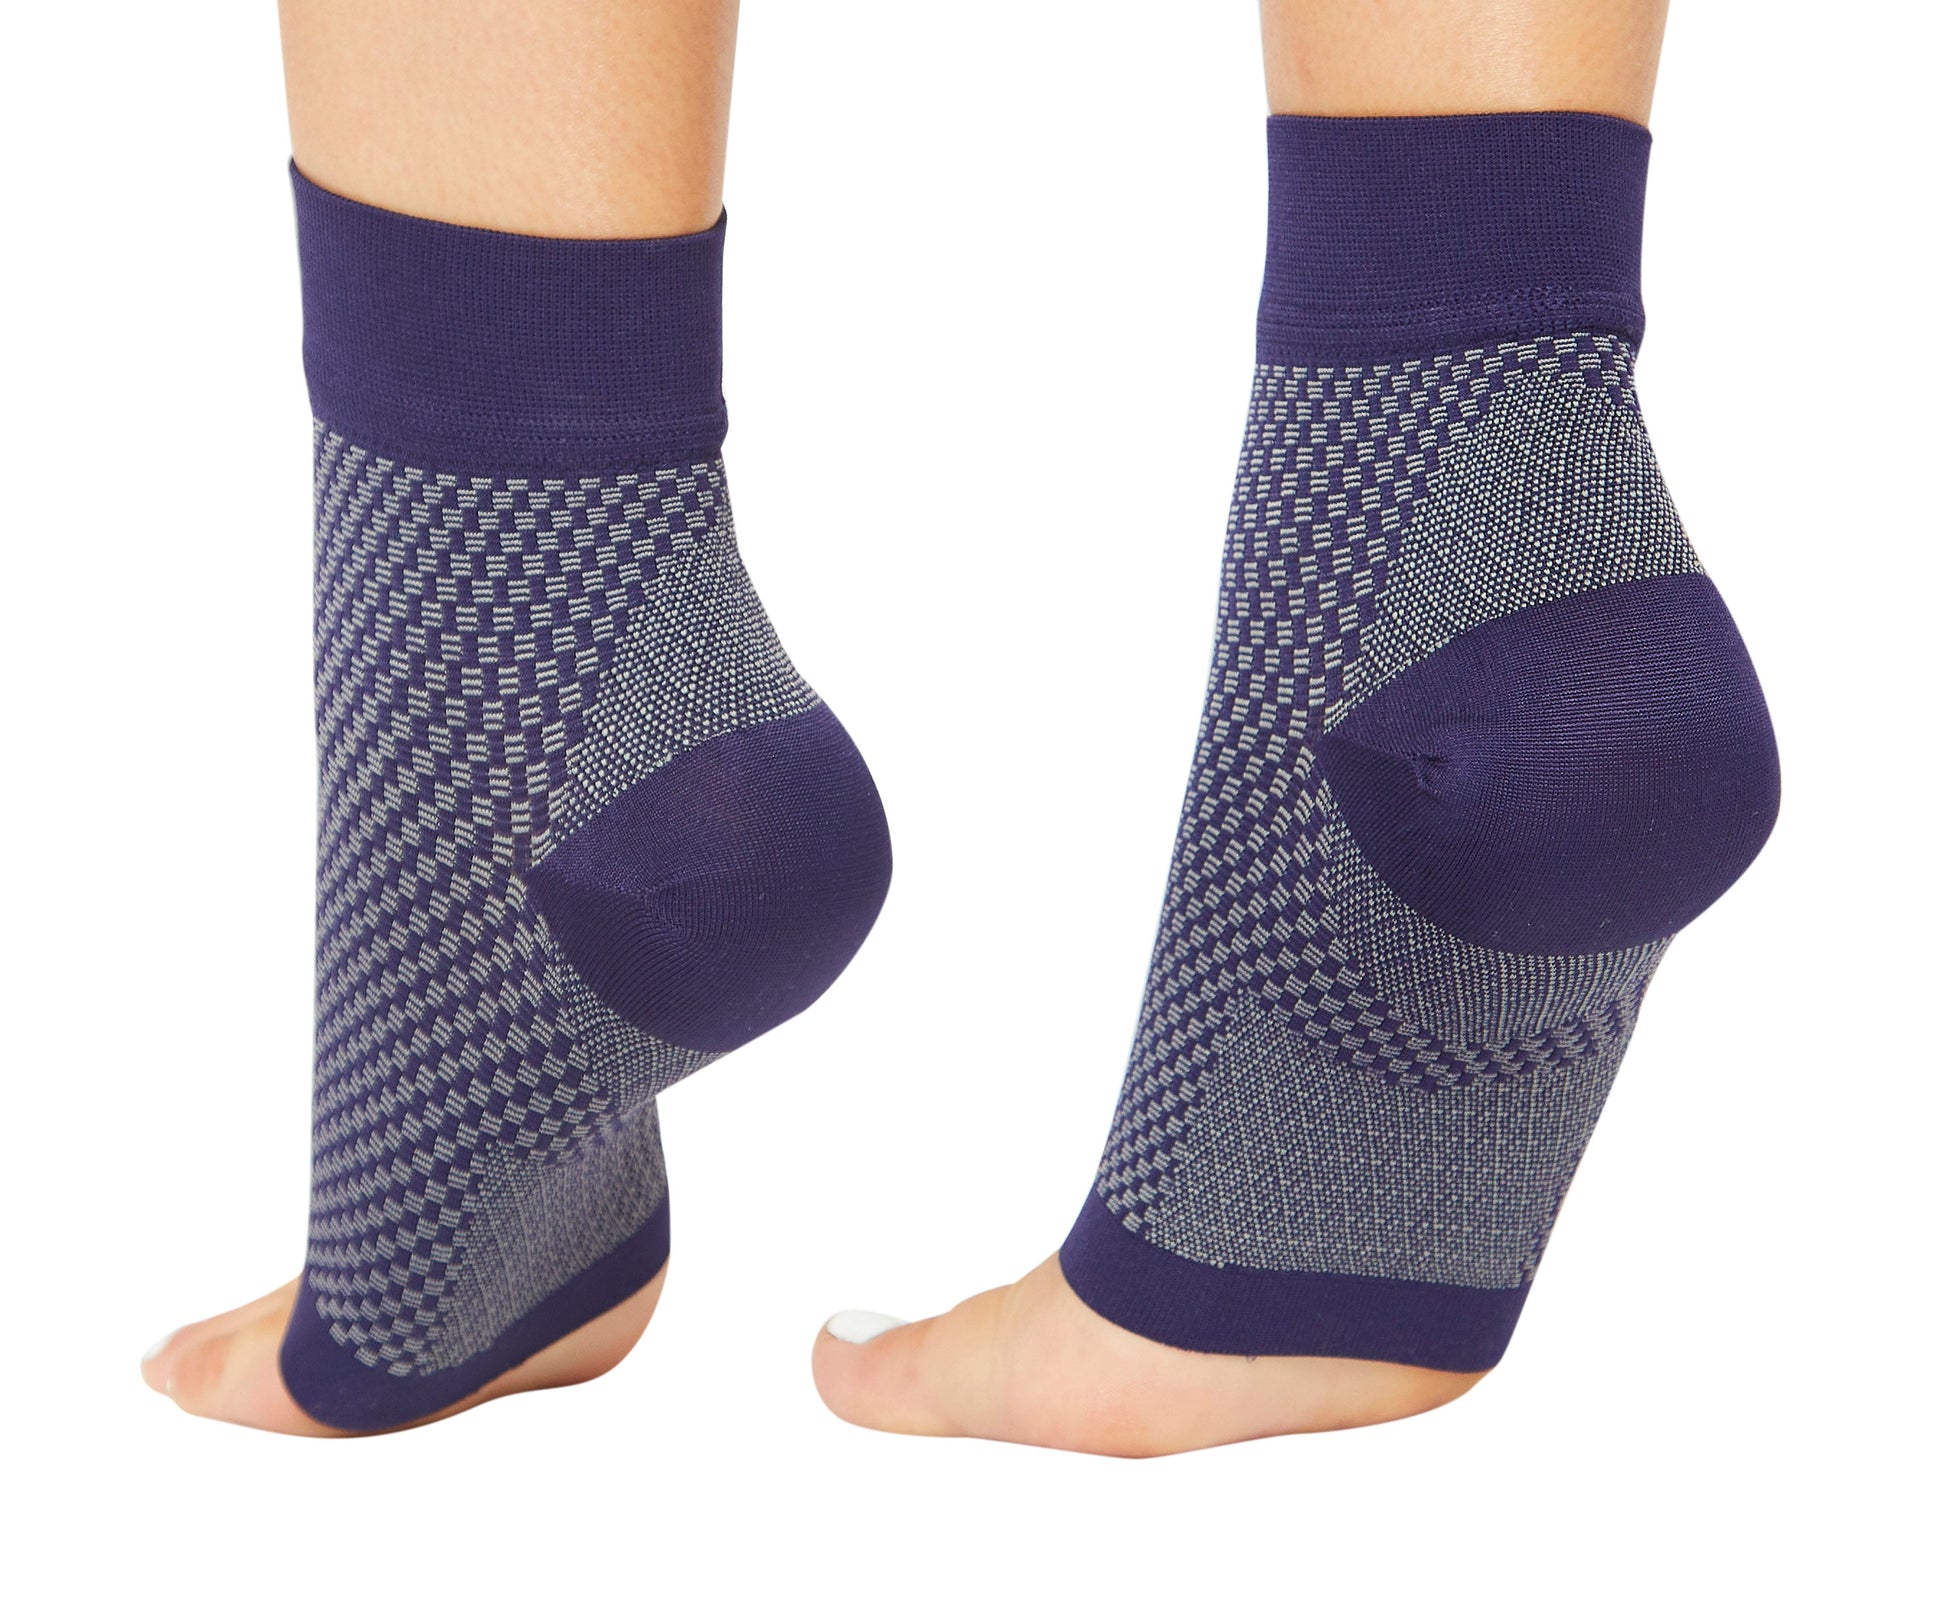 Theodore Magnus Premium Compression Socks for Plantar Fasciitis, Heel - Ankle Foot Sleeves for Everyday and Night Splints Pain Relief Treatment with Arch Support - Navy